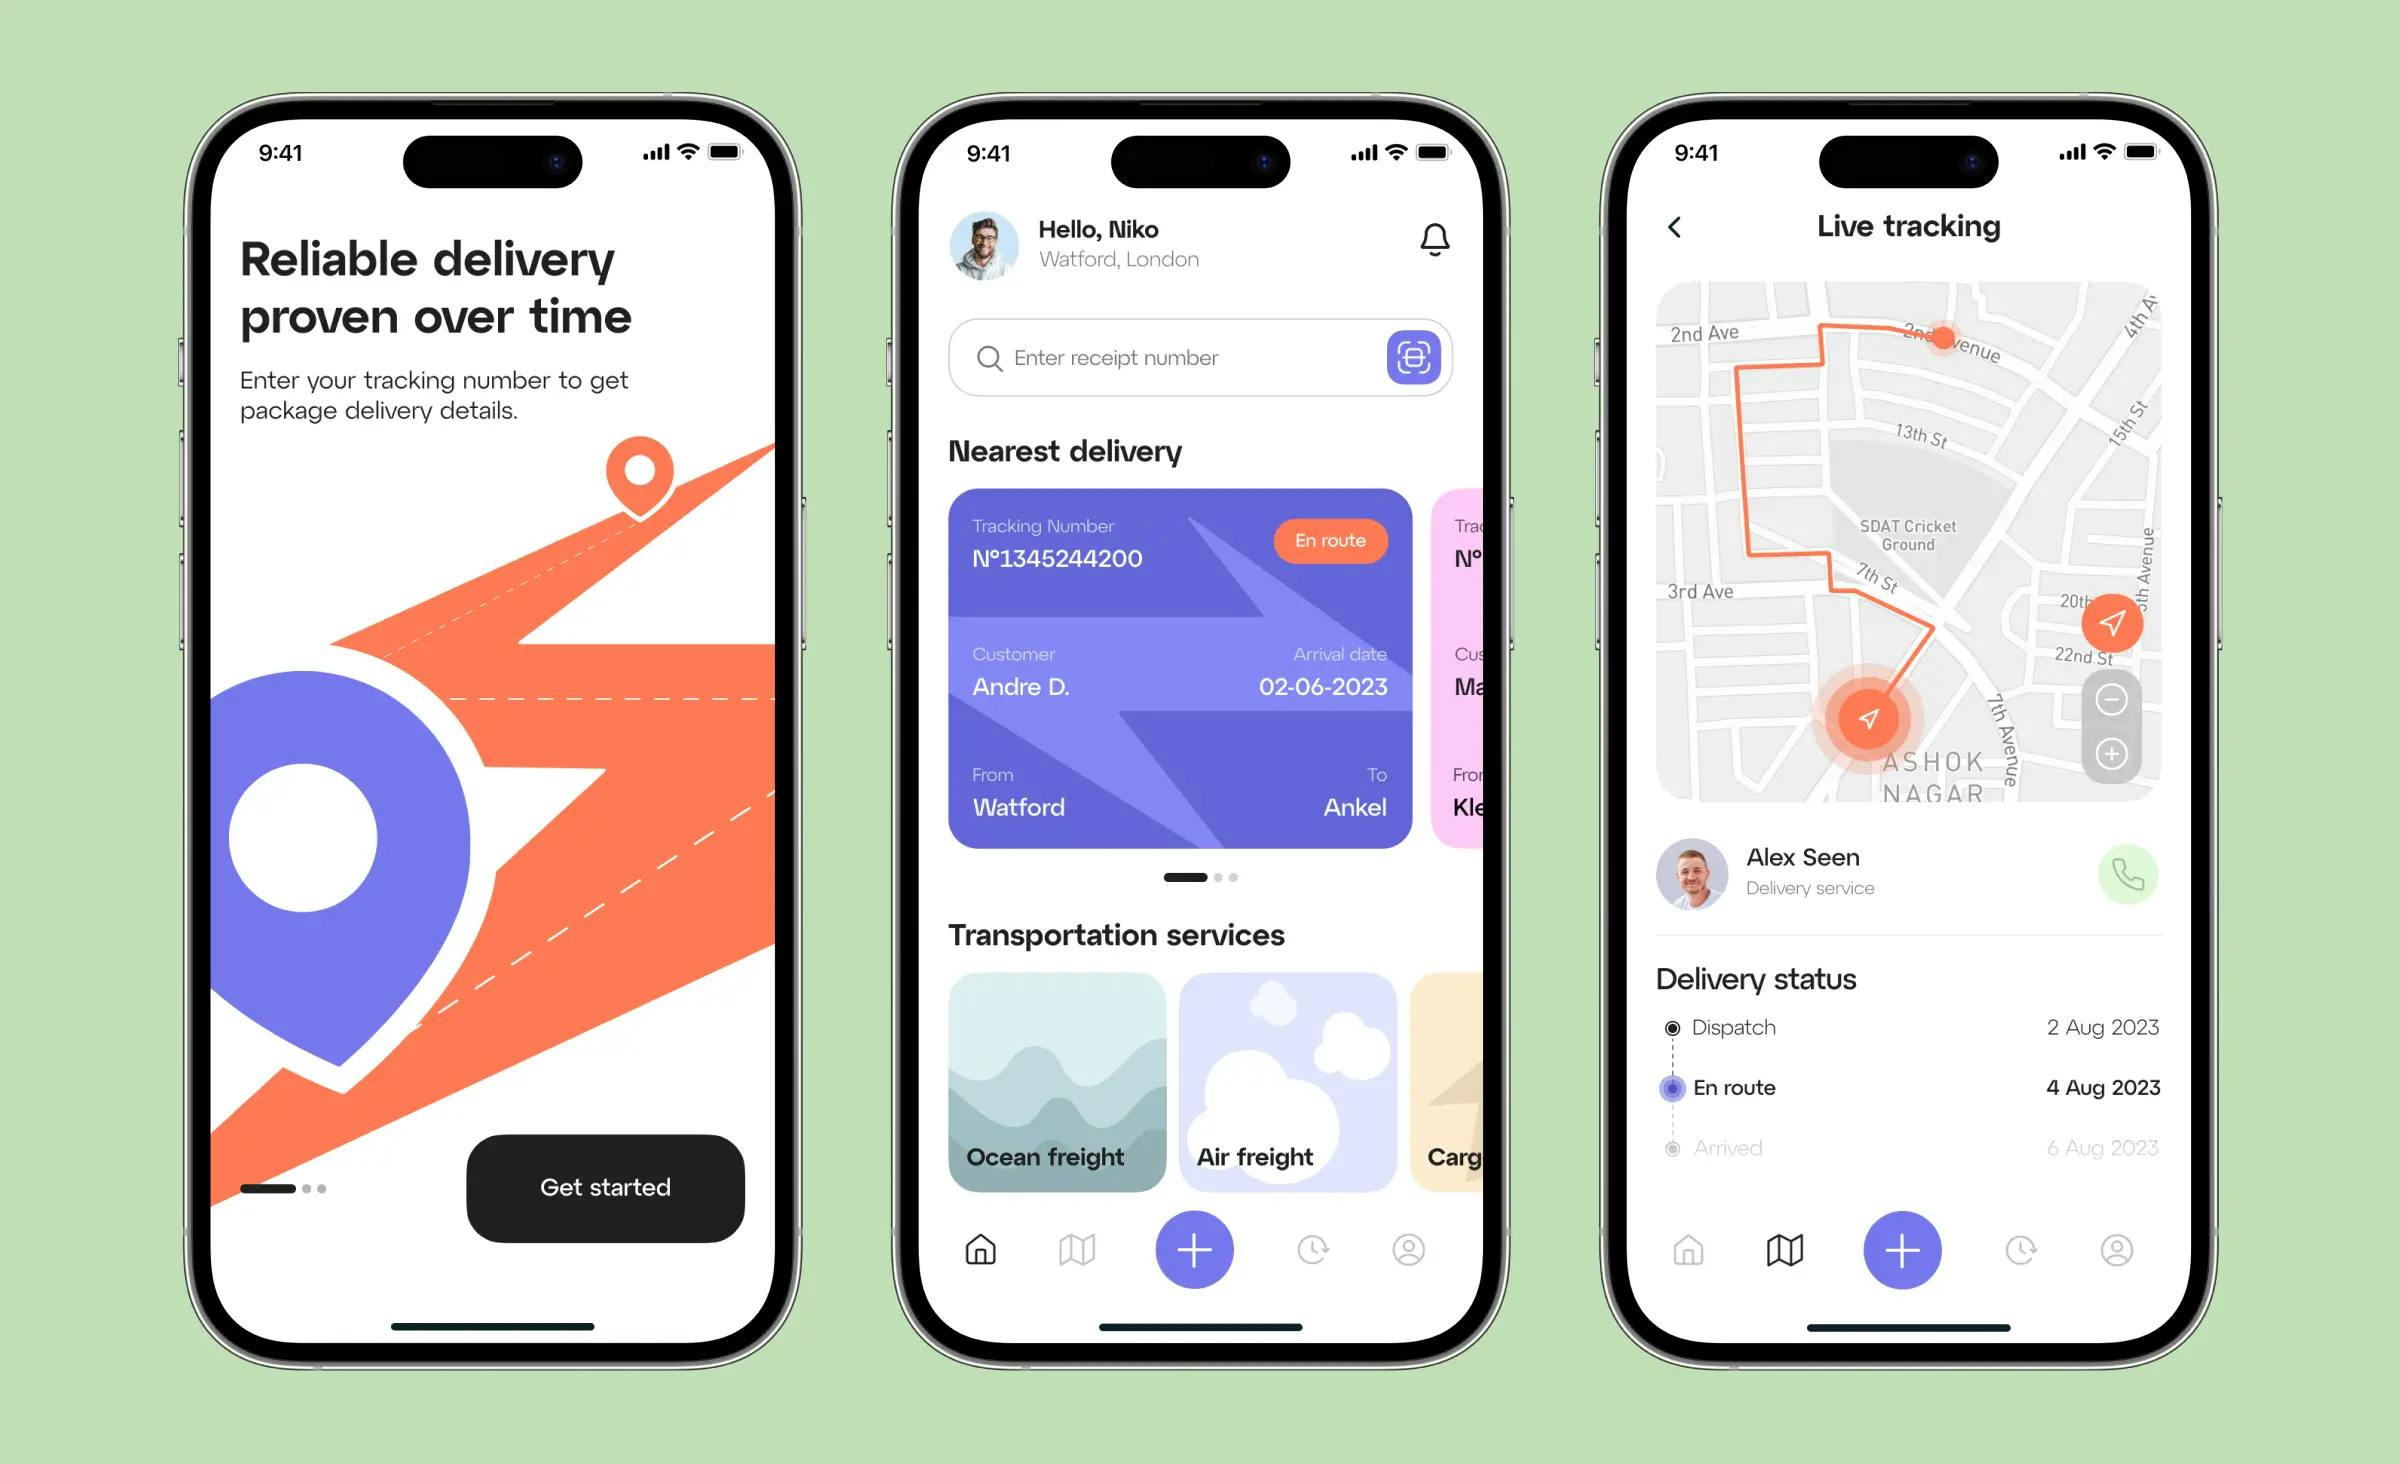 The image showcases an example of a shipping mobile app designed by Ronas IT. It depicts three mobile app screens: the onboarding screen, the main page, and the map for live tracking. The company offers both design and logistics software development services.